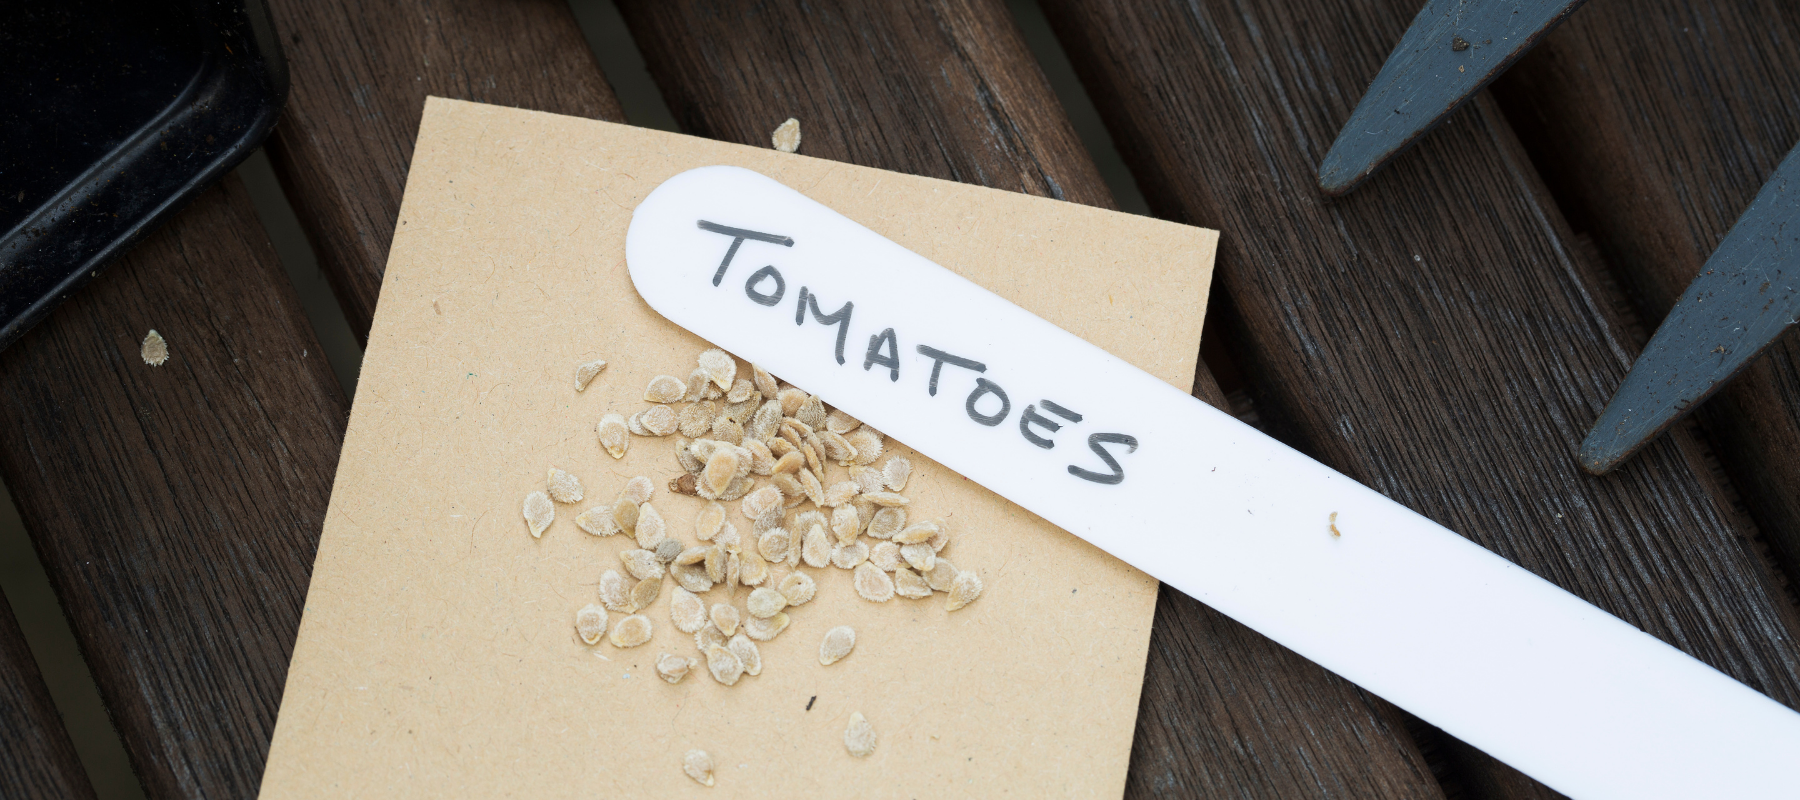 How to grow tomatoes from seed